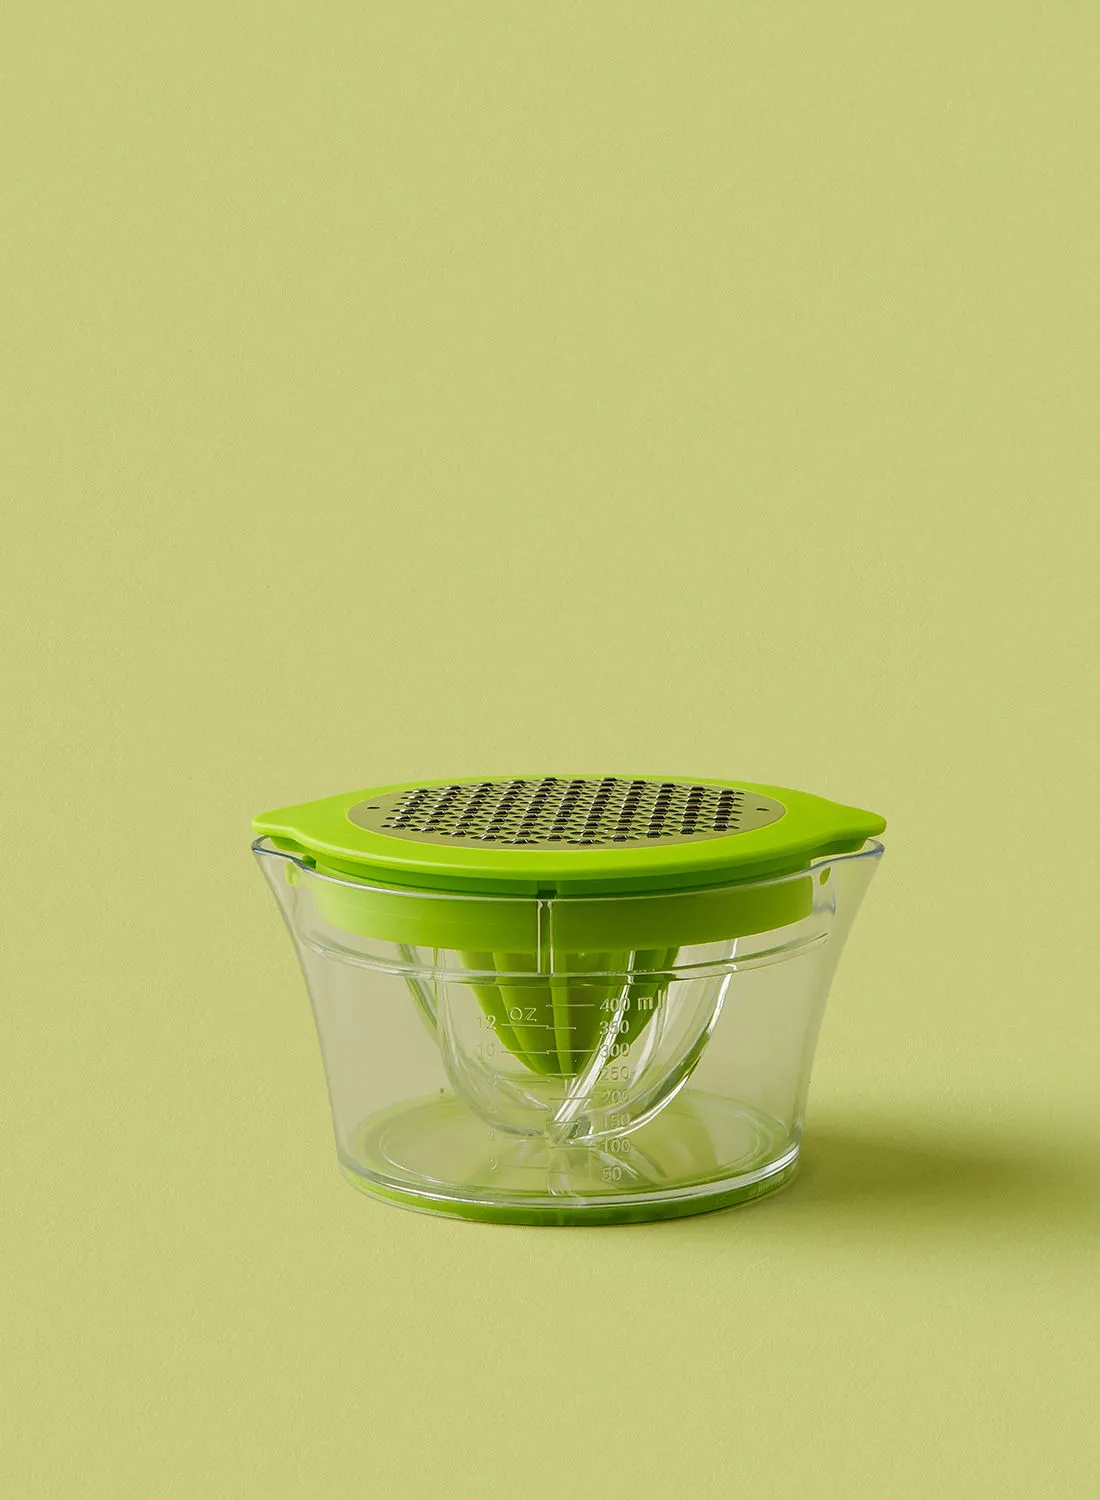 noon east Kitchen Tool - 2 In 1 - Manual Juicer And Grater - Lemon Squeezer - Kitchen Accessories - Kitchen Tool - Green/White